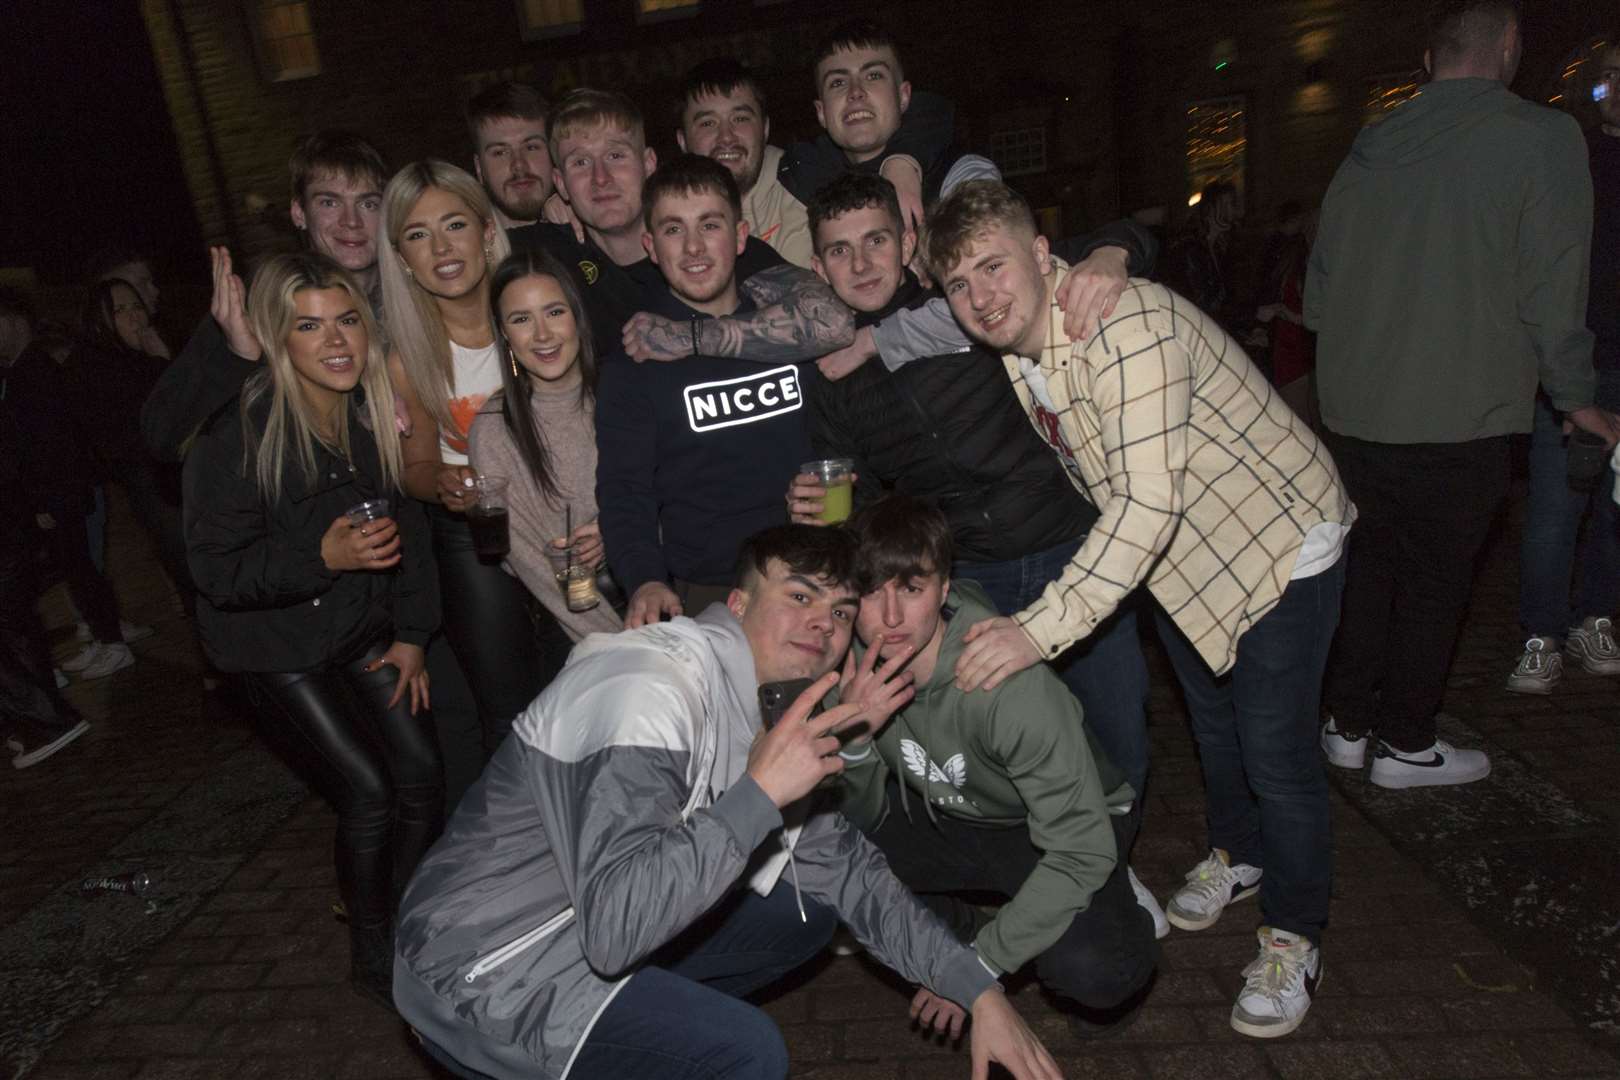 A group of happy revellers waiting for the bells. Picture: Robert MacDonald/Northern Studios